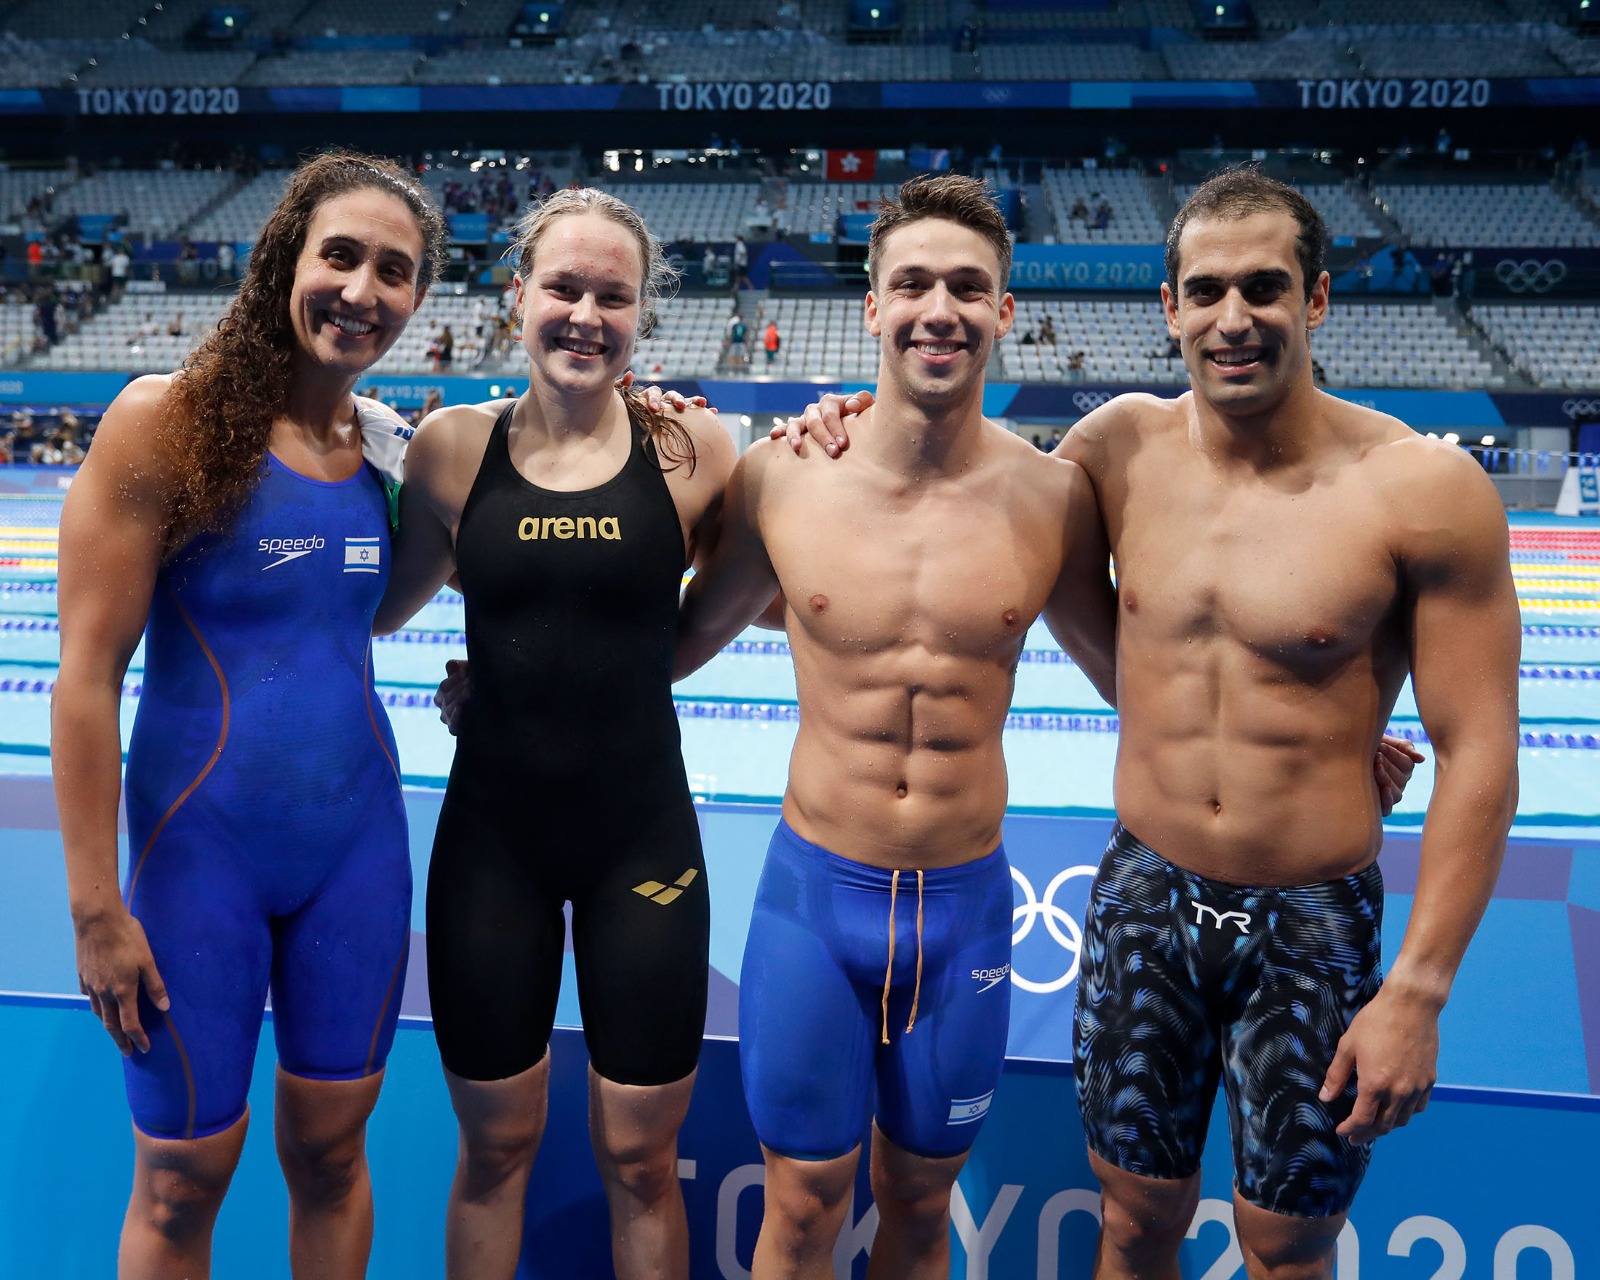 Follow the French 2020 Olympic Swimming Roster on Instagram and